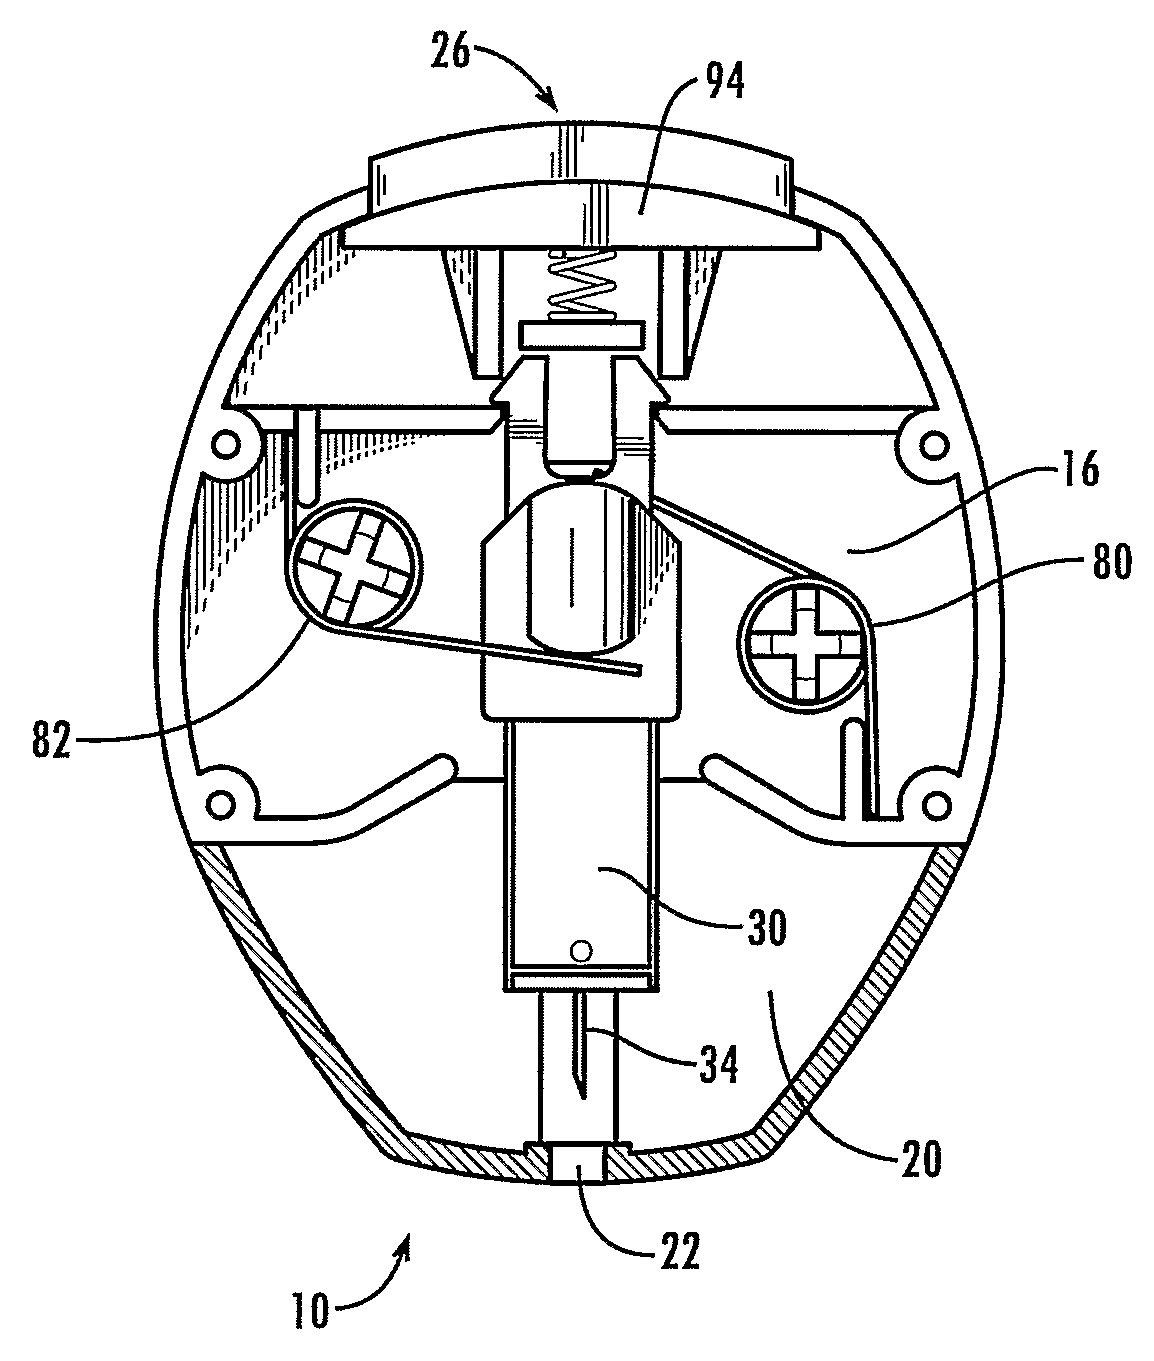 Compact Multi-Use Lancing Device